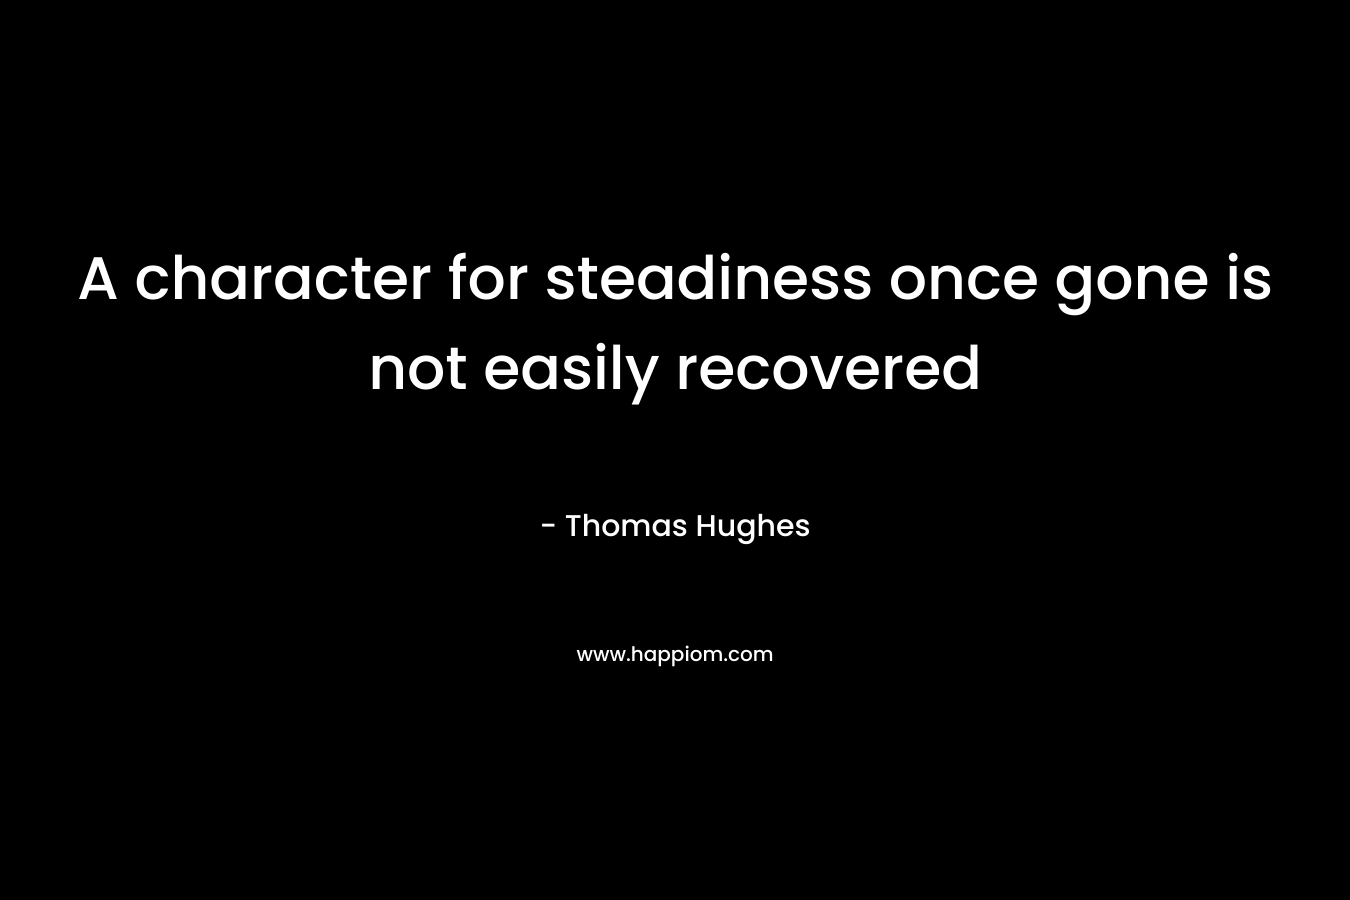 A character for steadiness once gone is not easily recovered